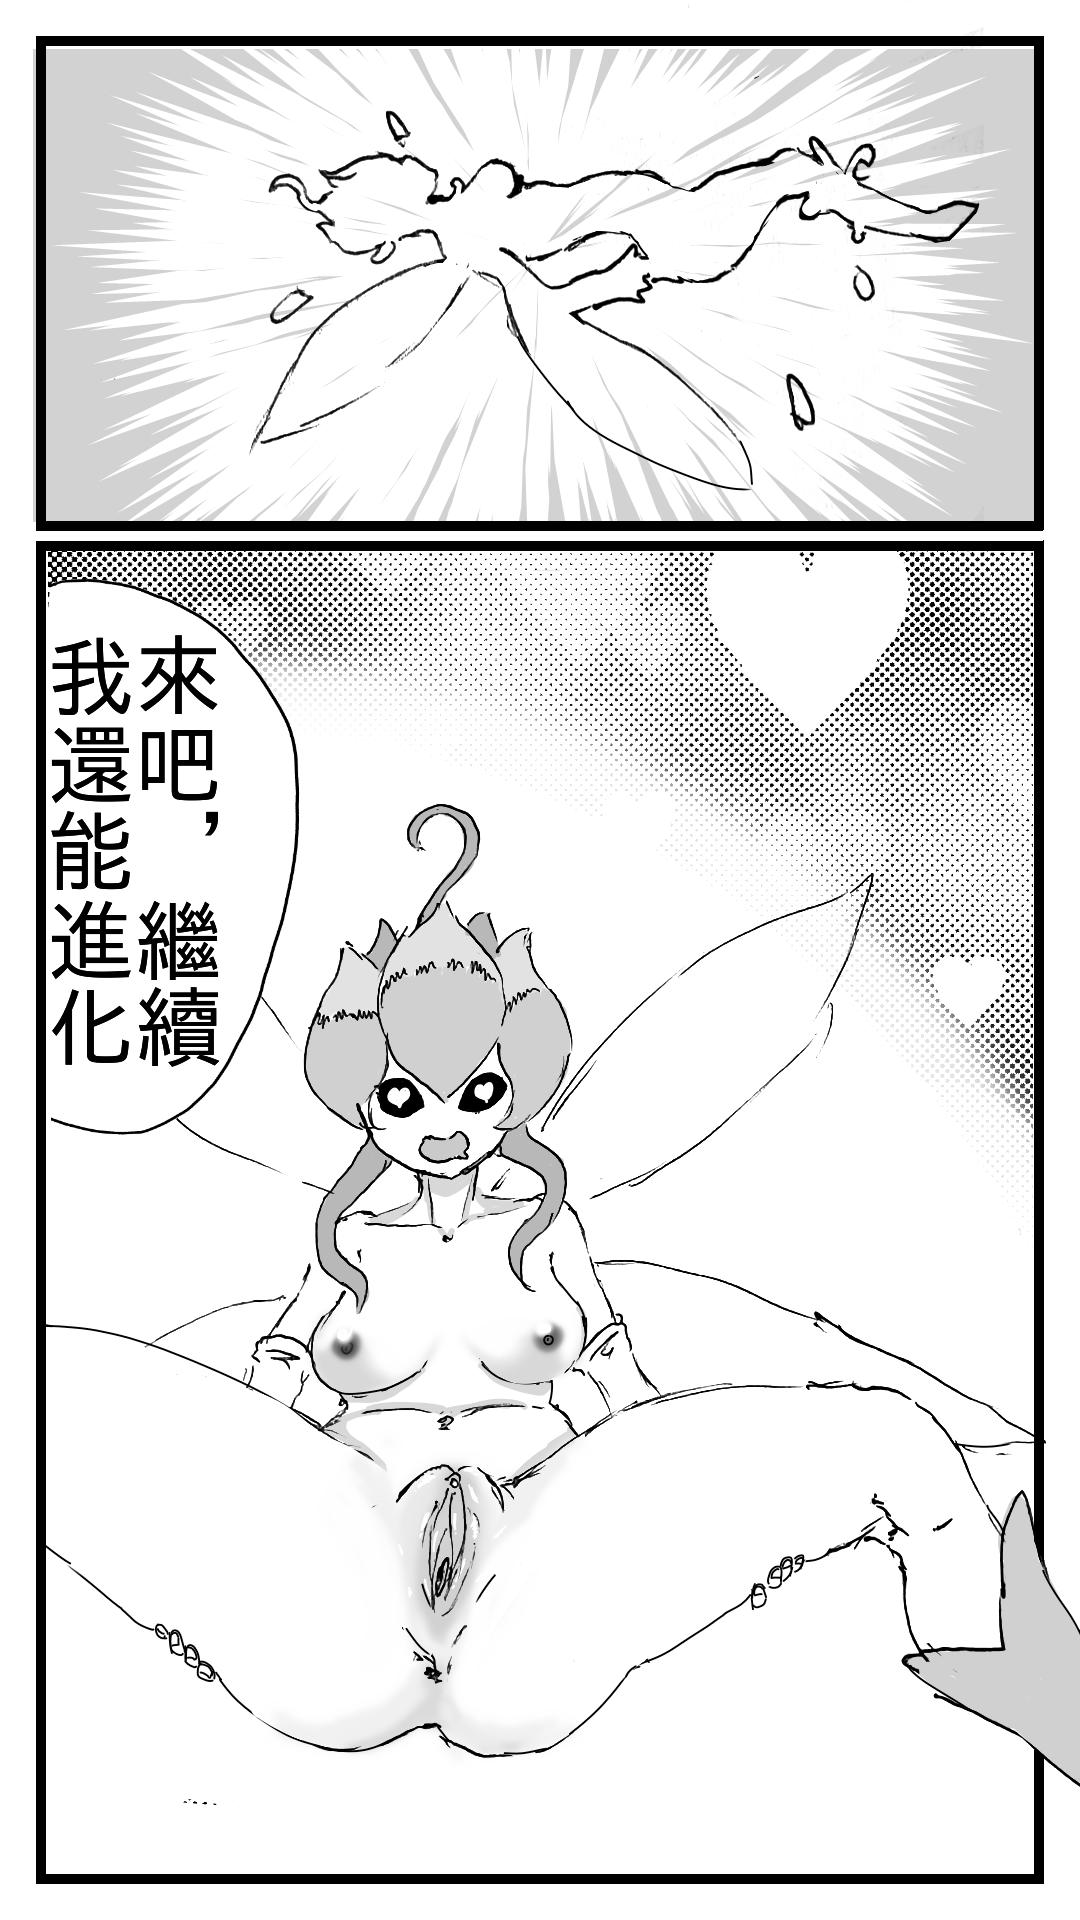 Facesitting 小智大战仙人掌兽 - Digimon Pokemon | pocket monsters Young Tits - Page 11